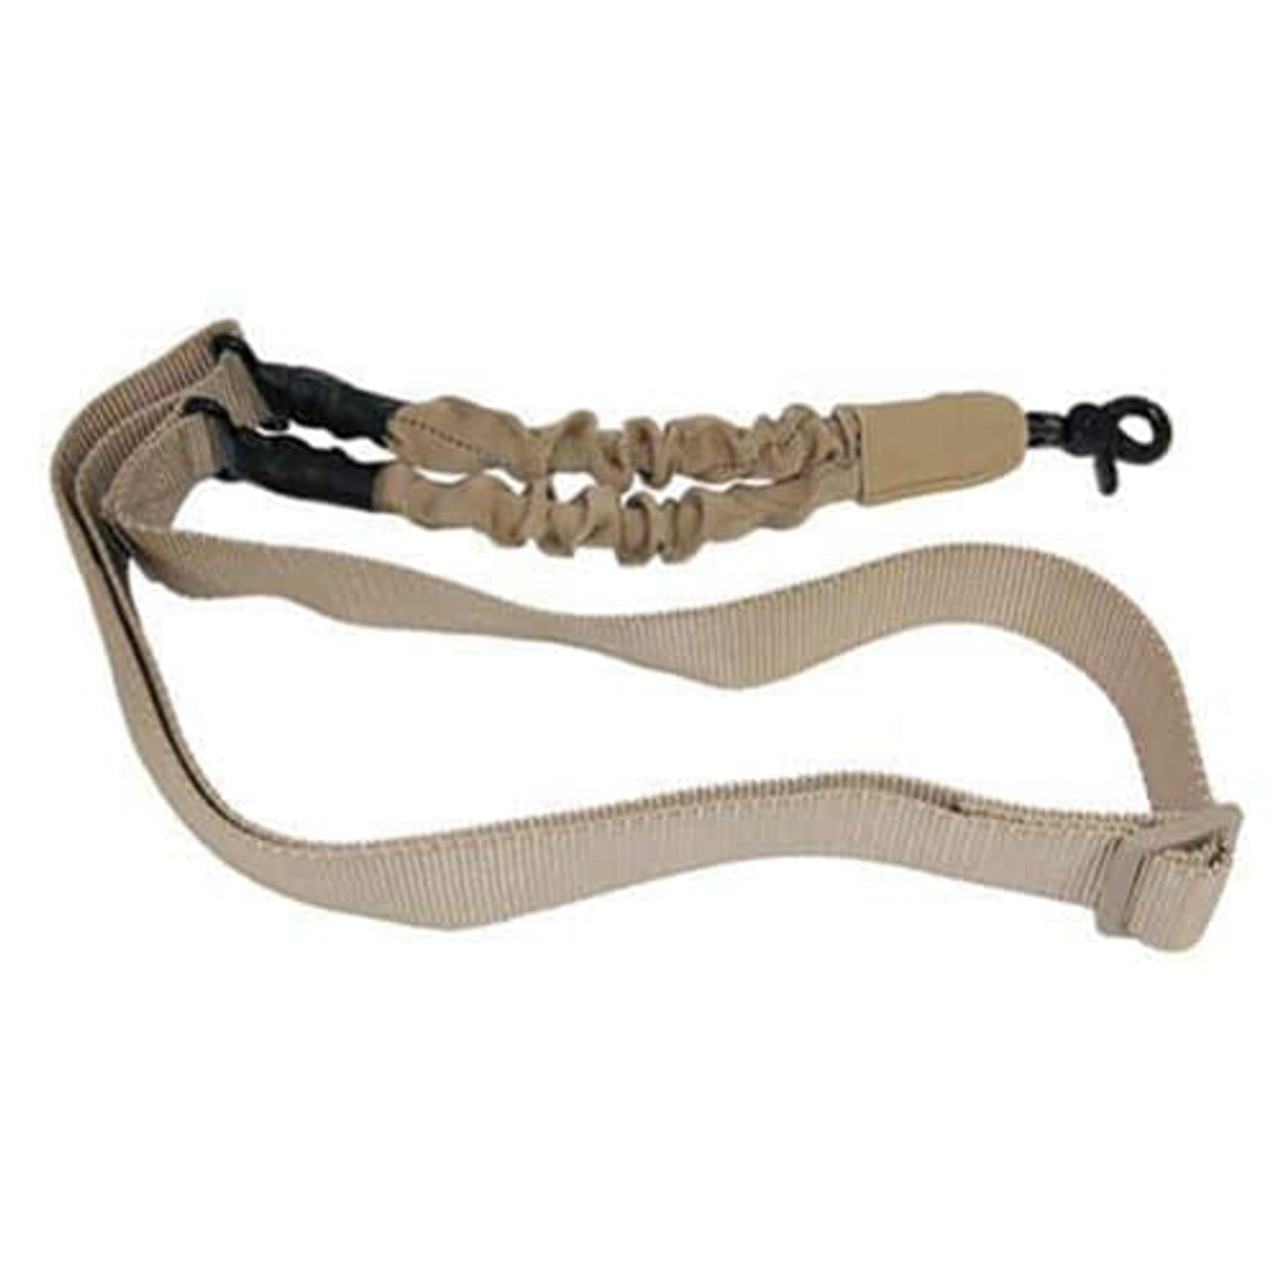 Guntec USA 1POINT-T One Point Bungee Sling With QD Snap Hook (Desert Tan)